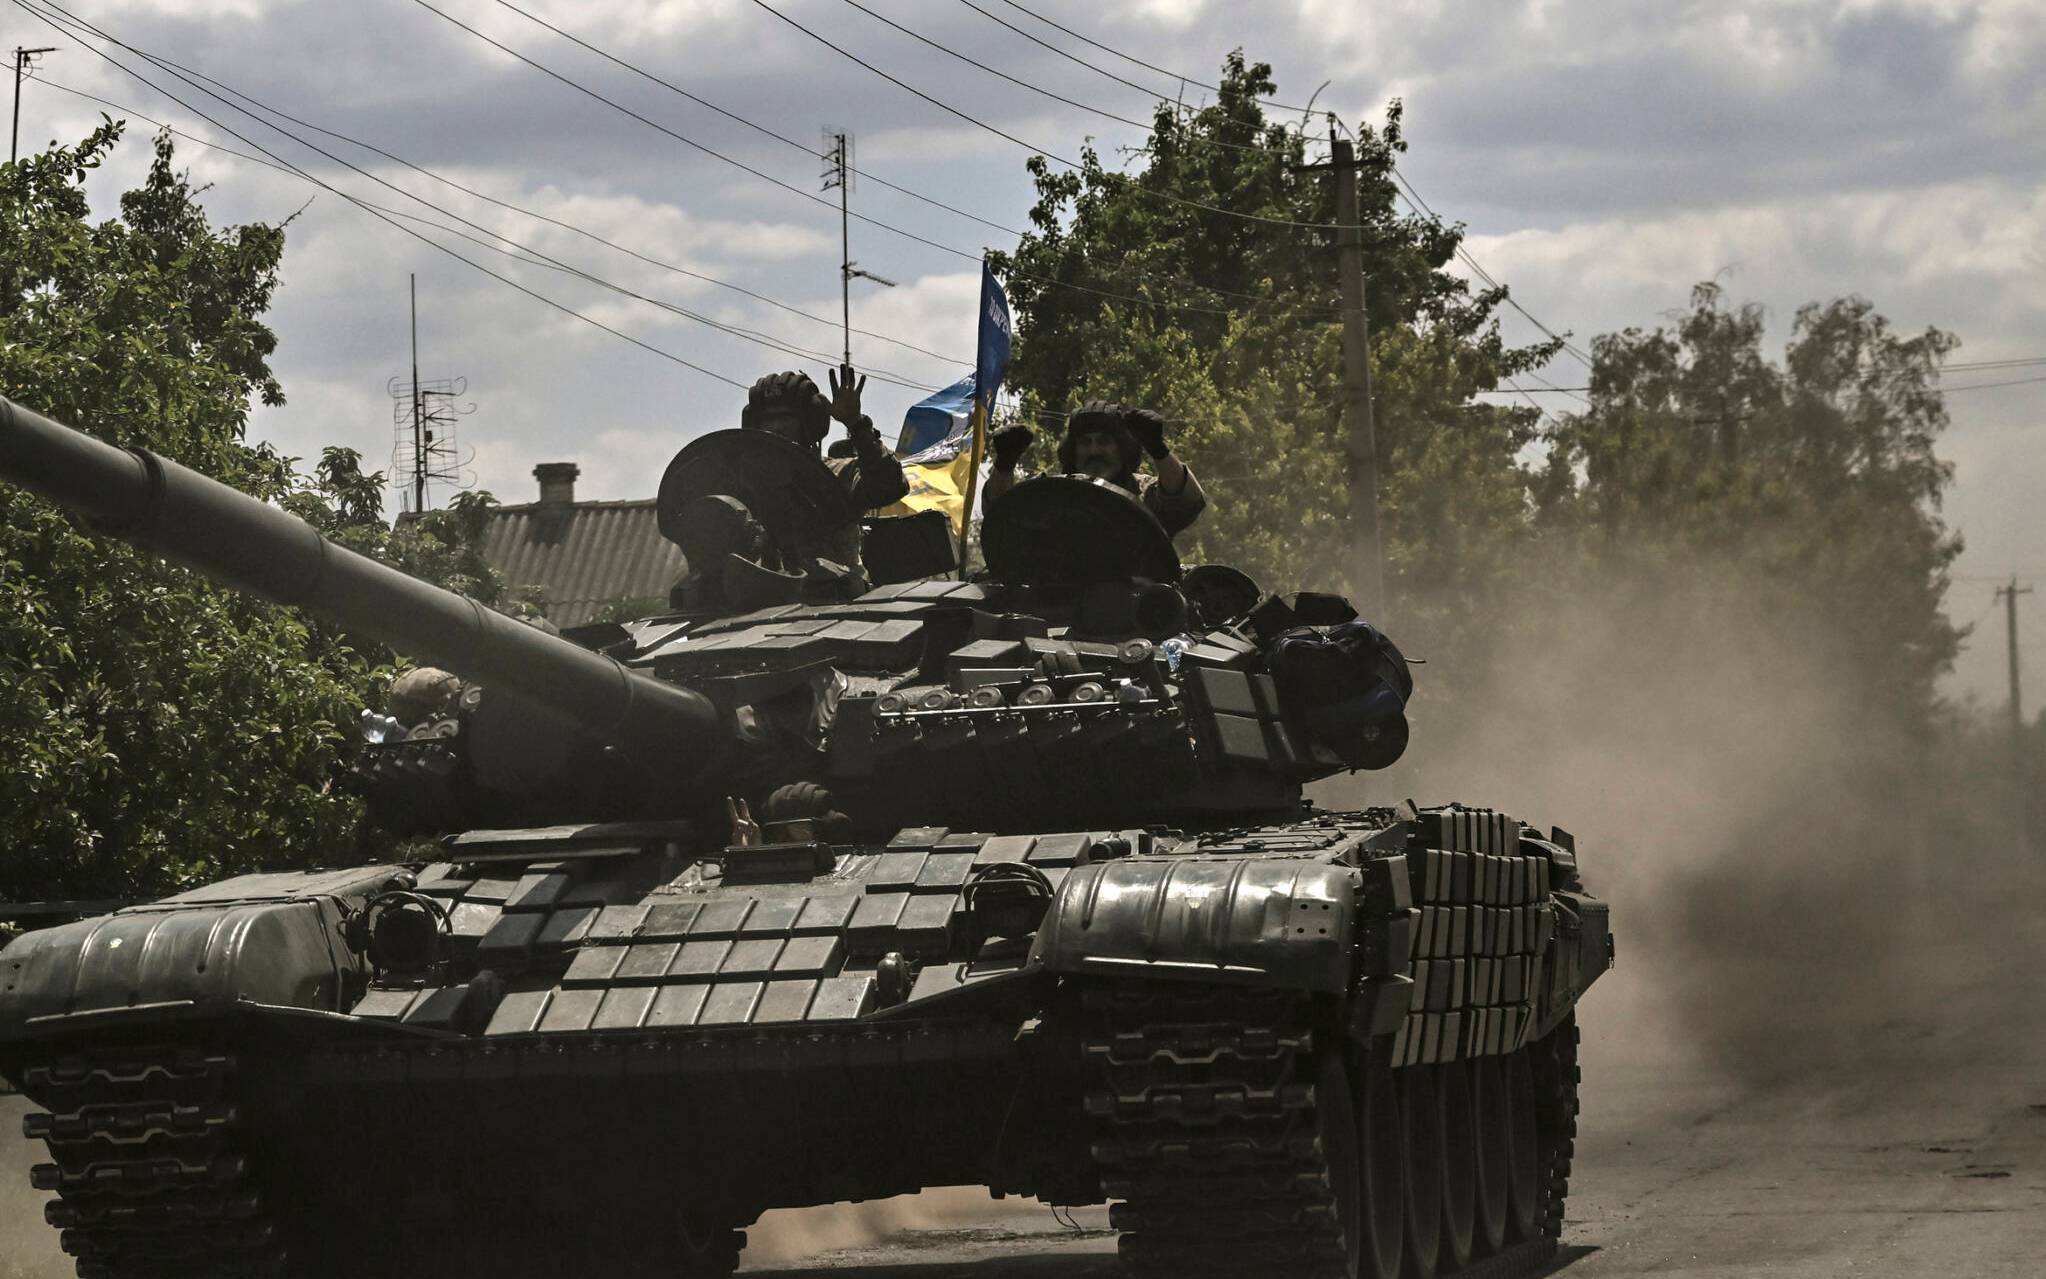 Ukrainian troop members move towards the front line with an army's Main Battle Tank (MBT) in the eastern Ukrainian region of Donbas on June 7, 2022. (Photo by ARIS MESSINIS / AFP)